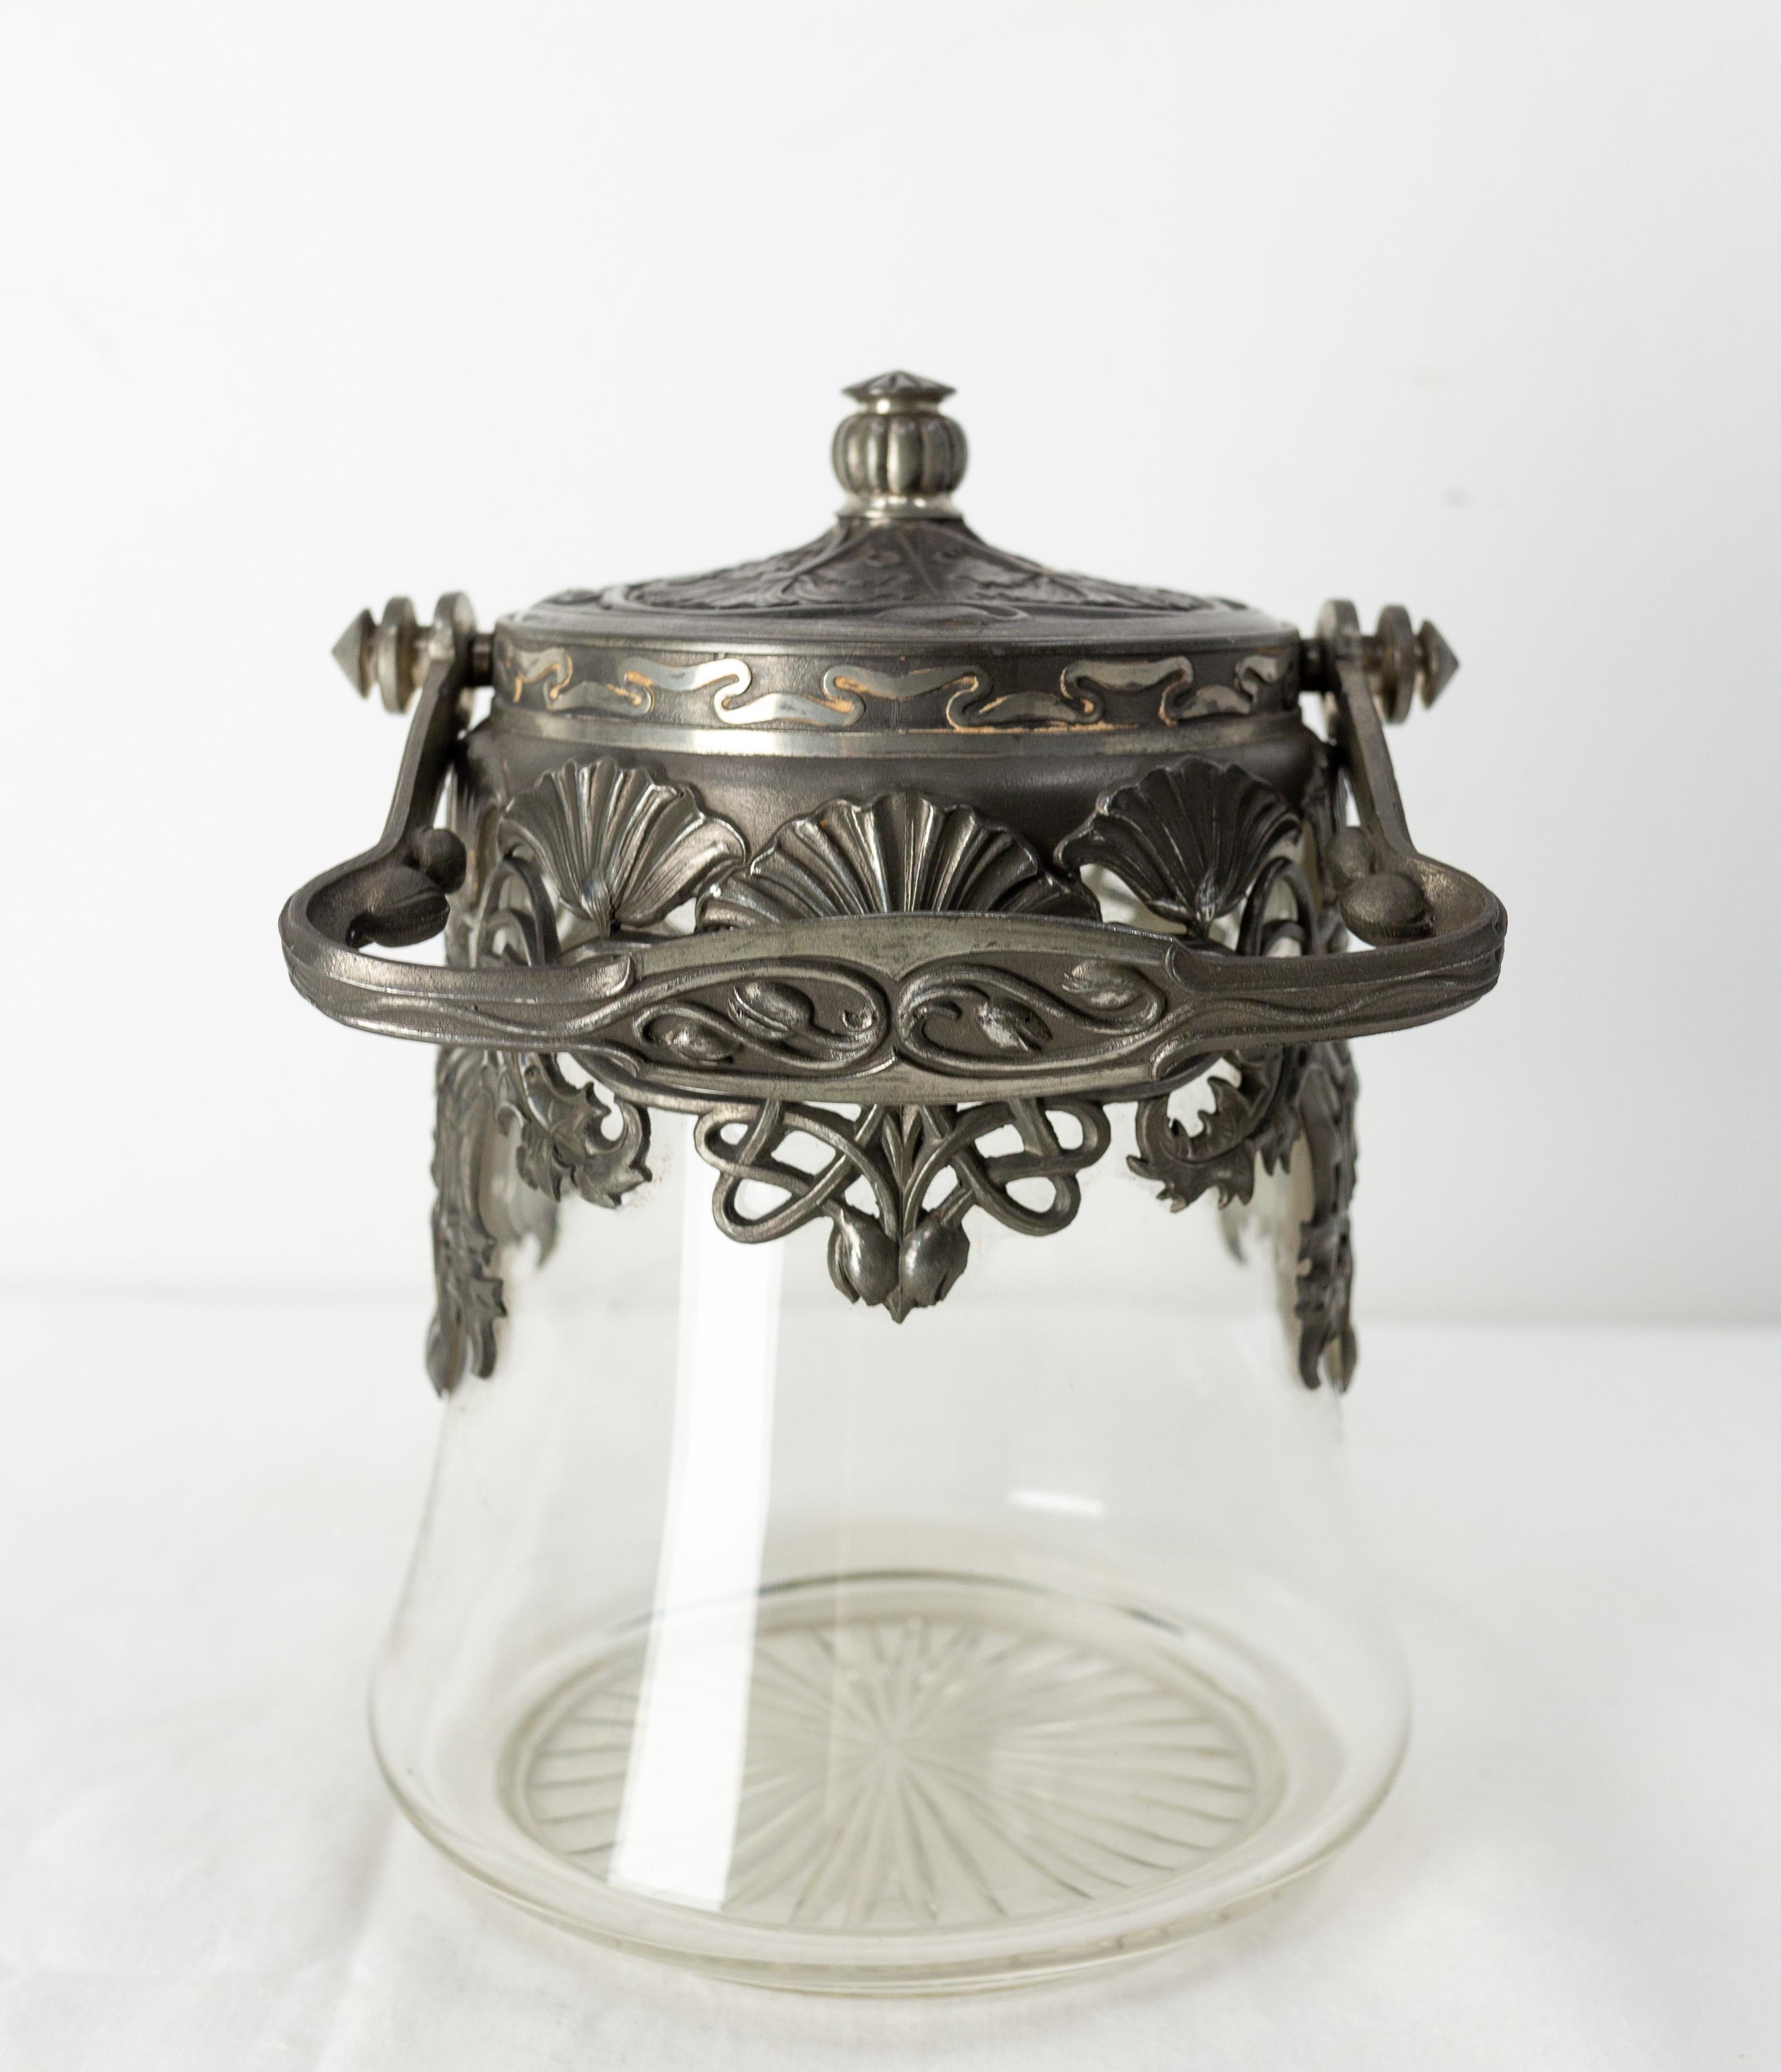 This tin and glass cookies jar is typical of the Art Nouveau period,
during which the designers sought to avoid straight lines while favoring curved lines. Art Nouveau is directly inspired by nature.
French, circa 1900

Shipping:
14 / 14 / 19